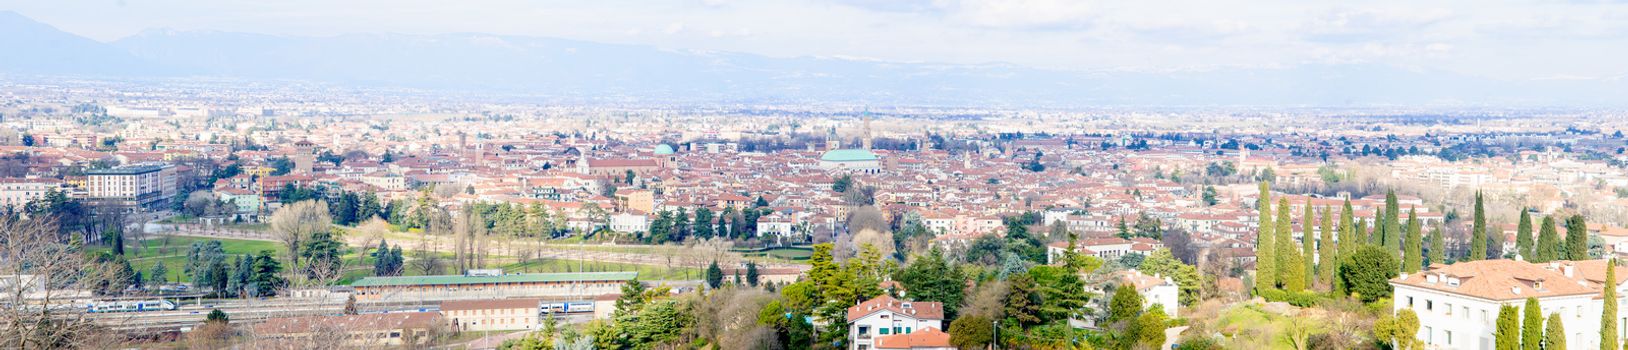 Panoramic view of the center of Vicenza, Veneto, Italy